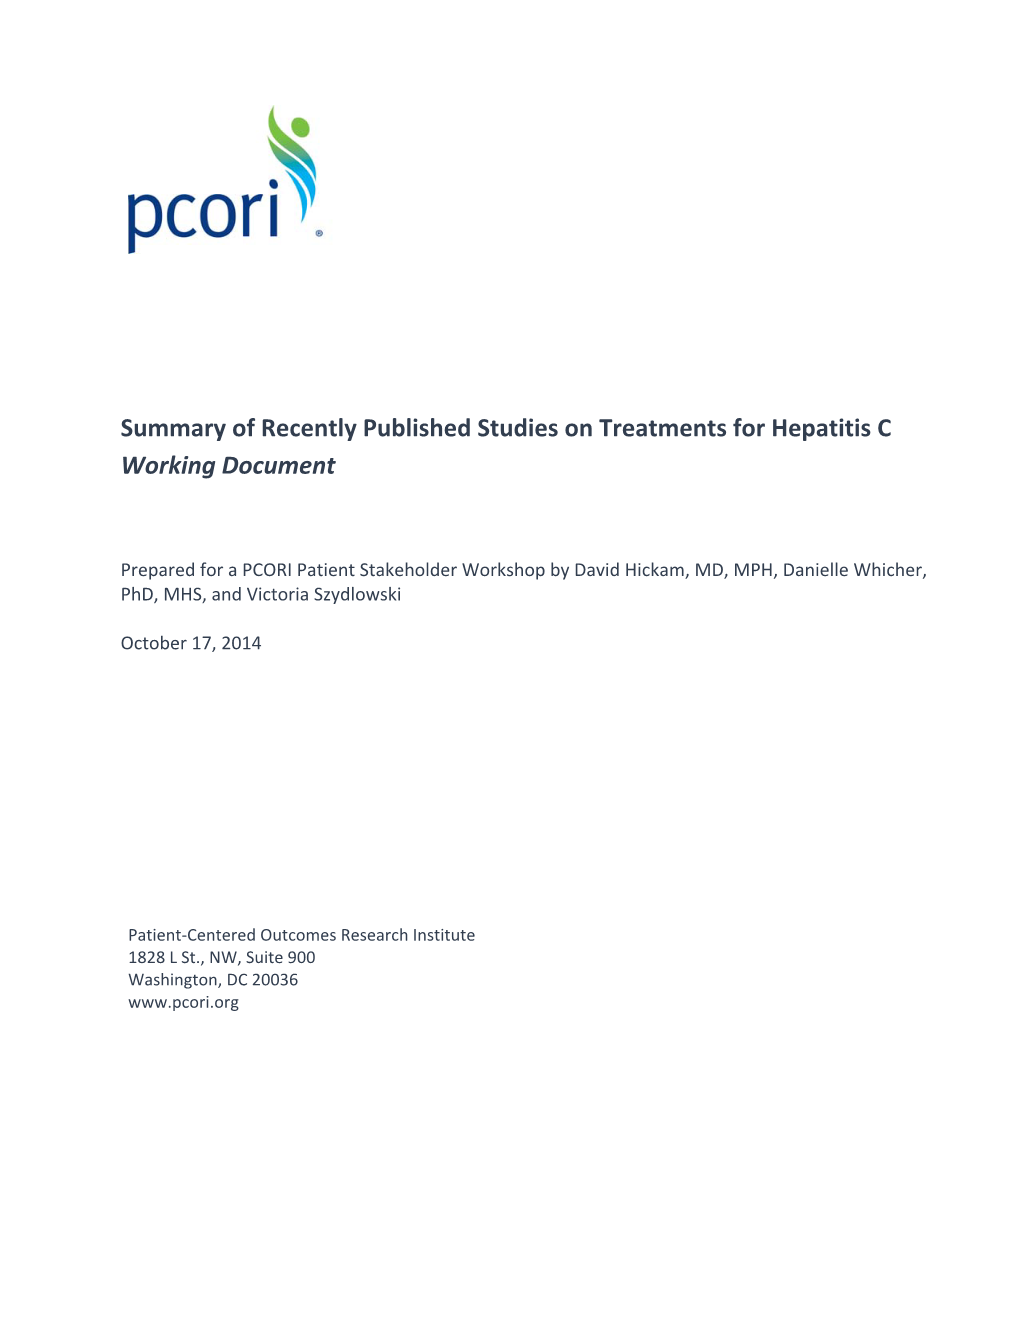 Summary of Recently Published Studies on Treatments for Hepatitis C Working Document